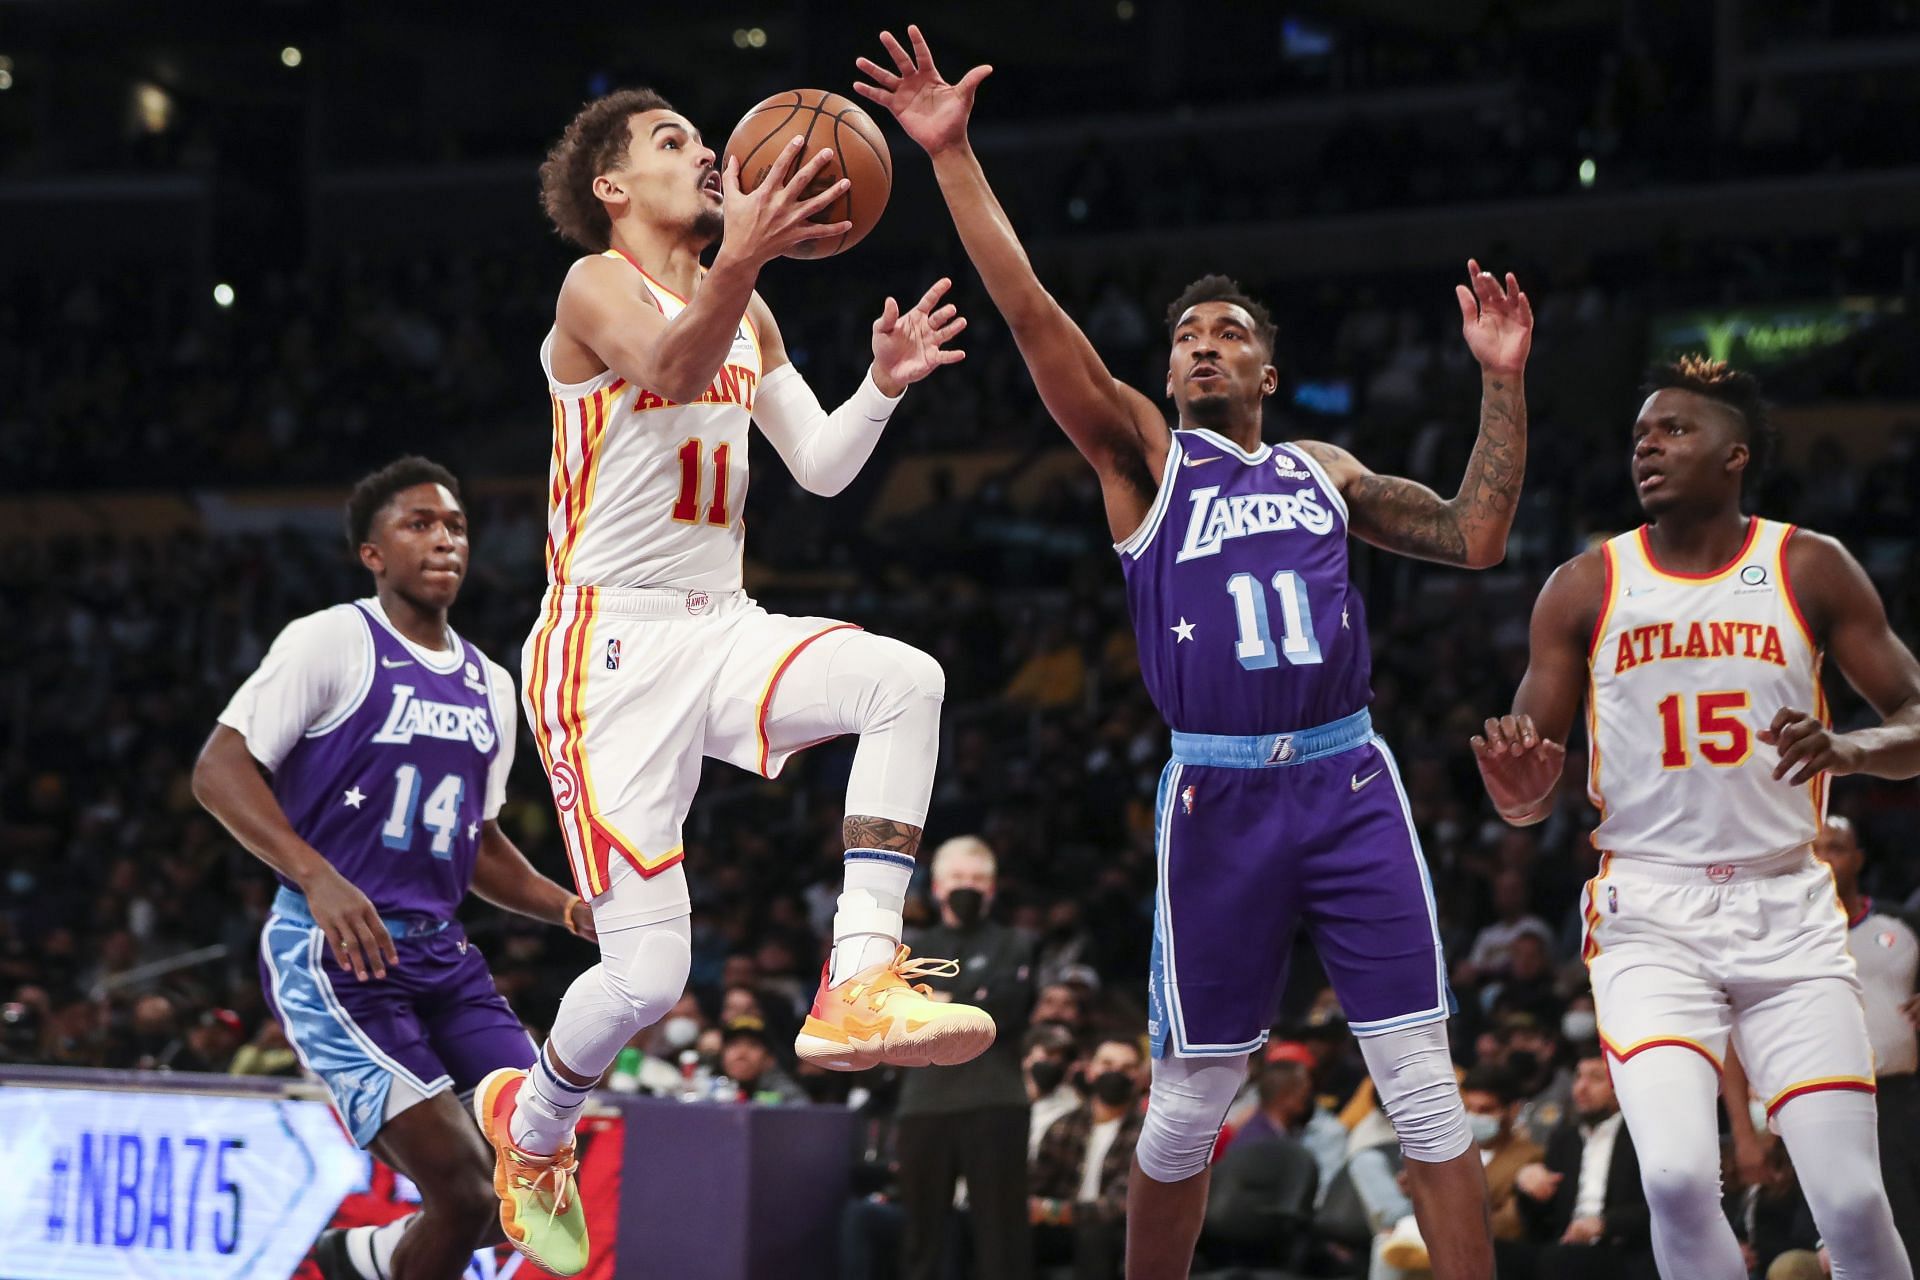 Trae Young #11 of the Atlanta Hawks drives to the basket deffended by Malik Monk #11 of the Los Angeles